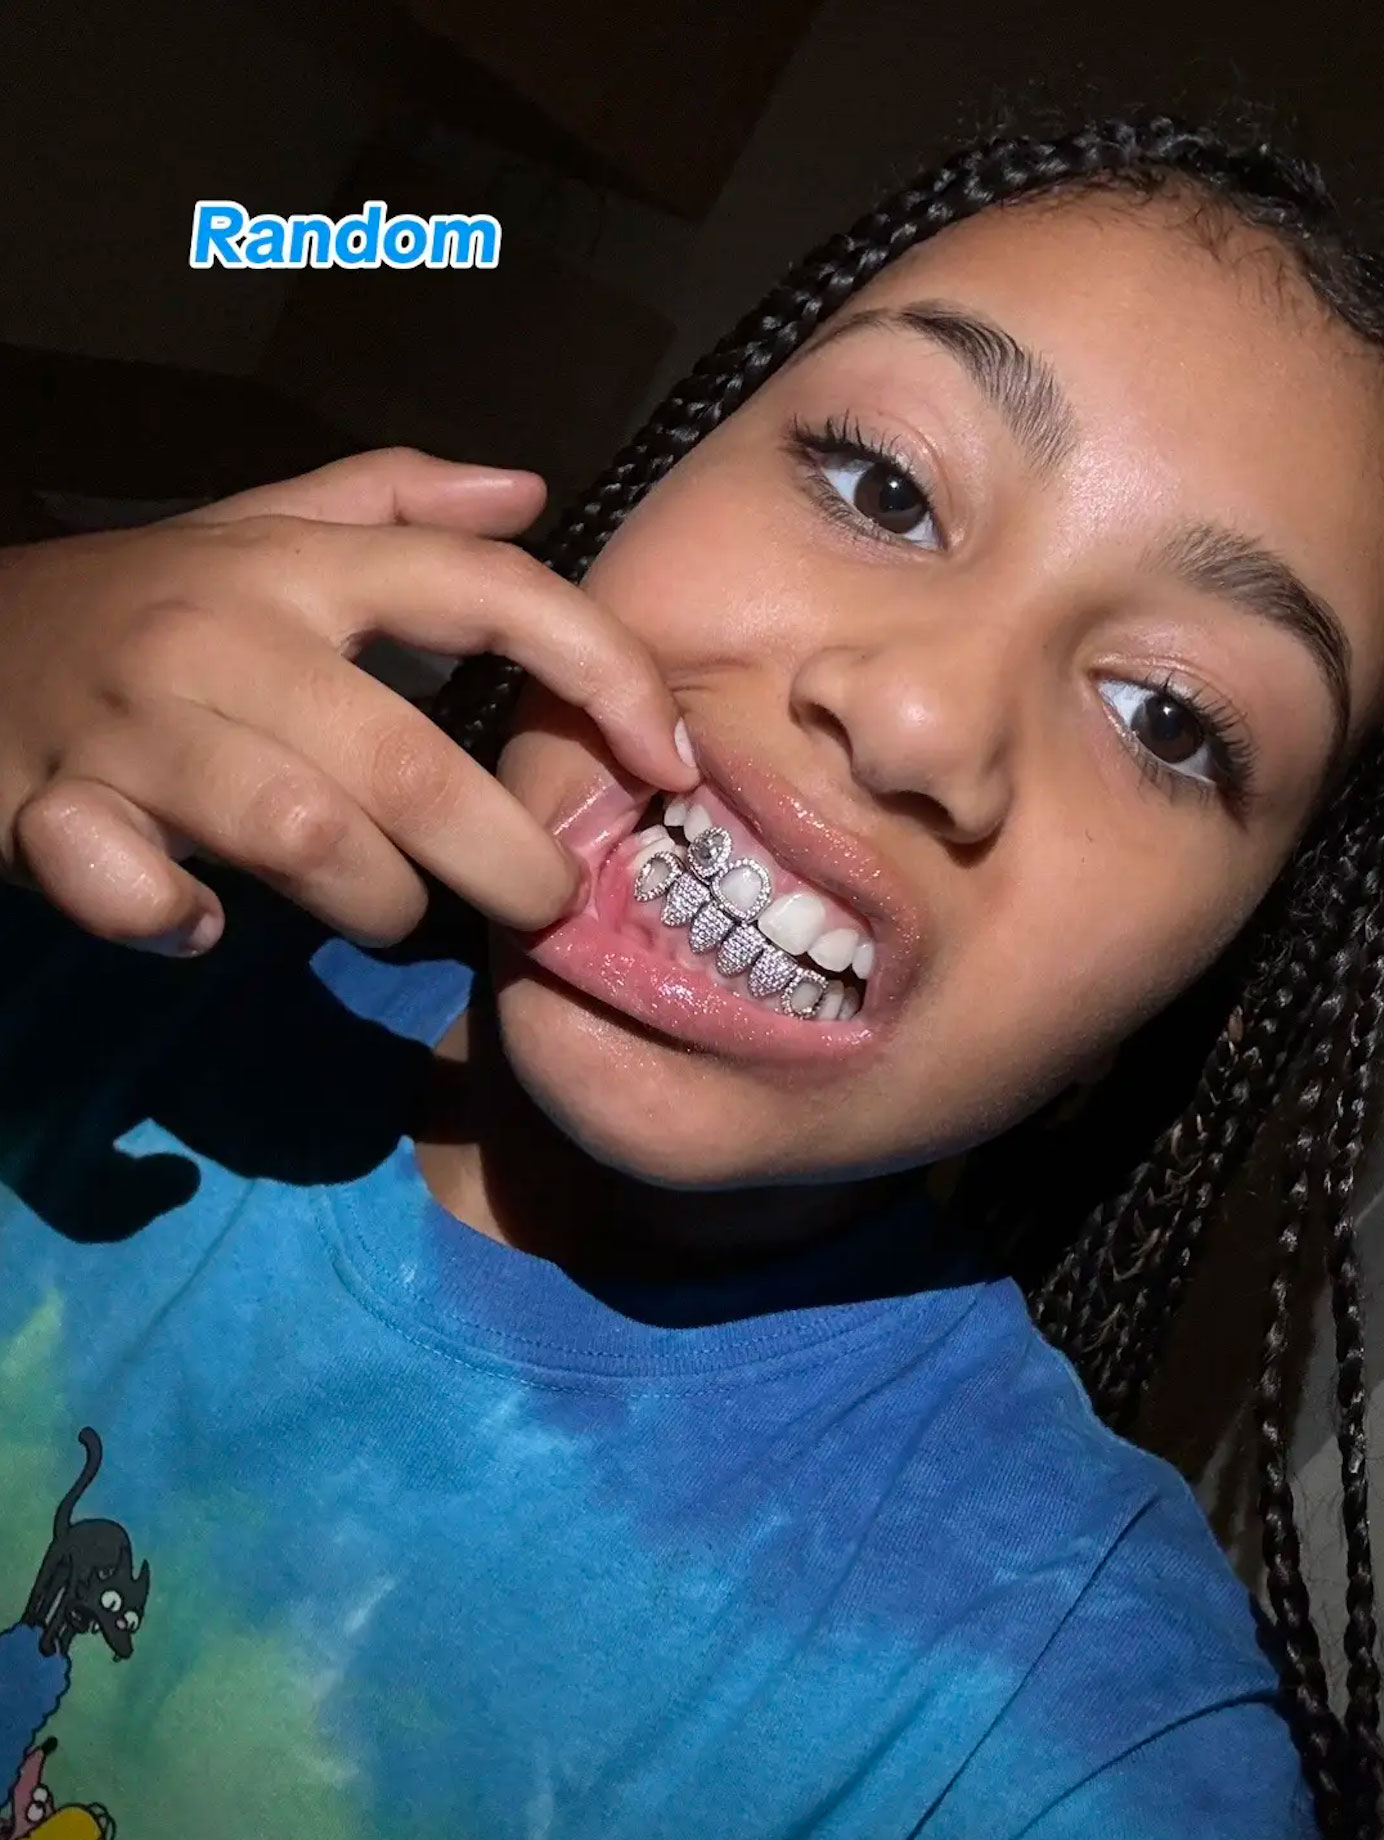 North's sleepover seemed very age-appropriate, after her parents were slammed for allowing her to get a diamond grill